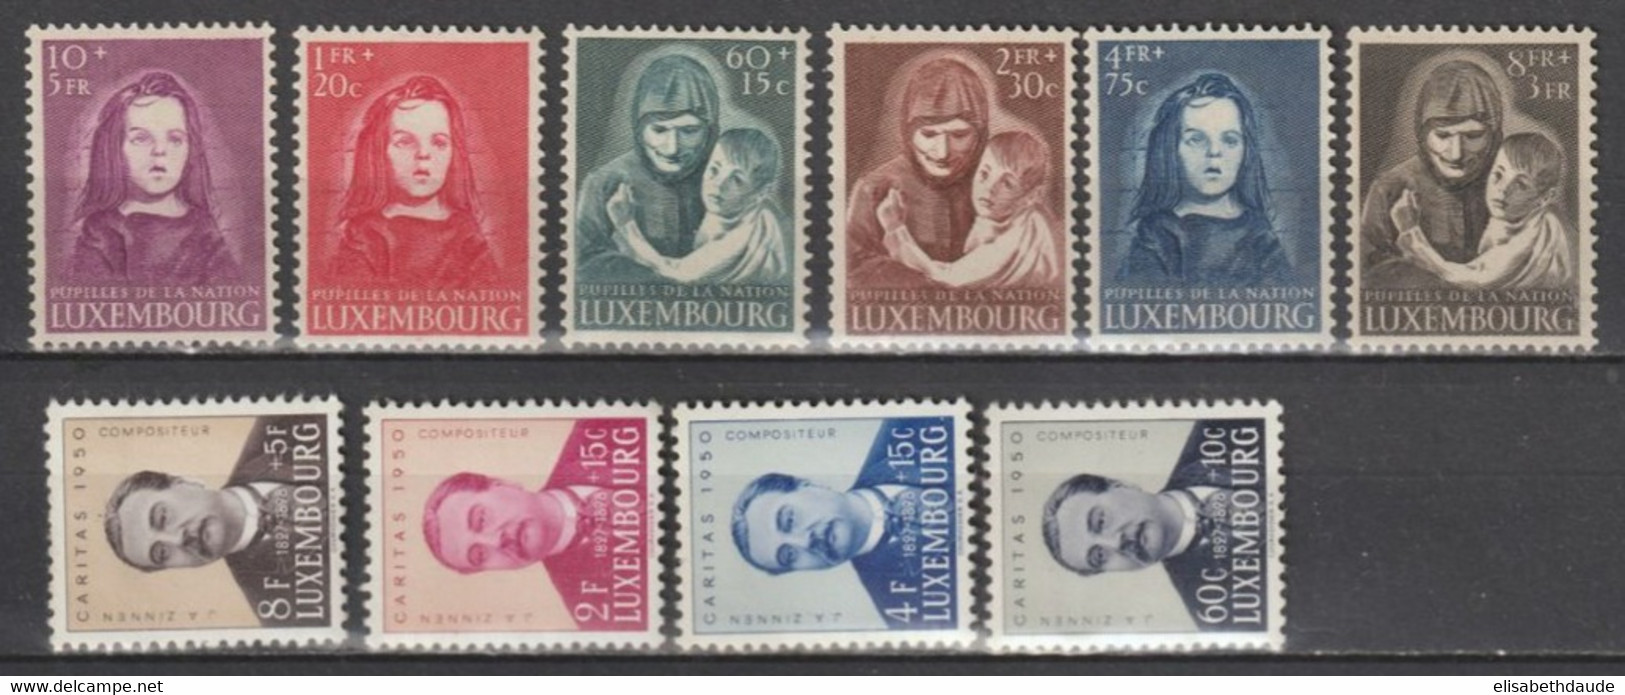 LUXEMBOURG - 1950 - ANNEE COMPLETE YVERT N°433/438 ** MNH + 439/442 * MLH - COTE = 160 EUR - Années Complètes